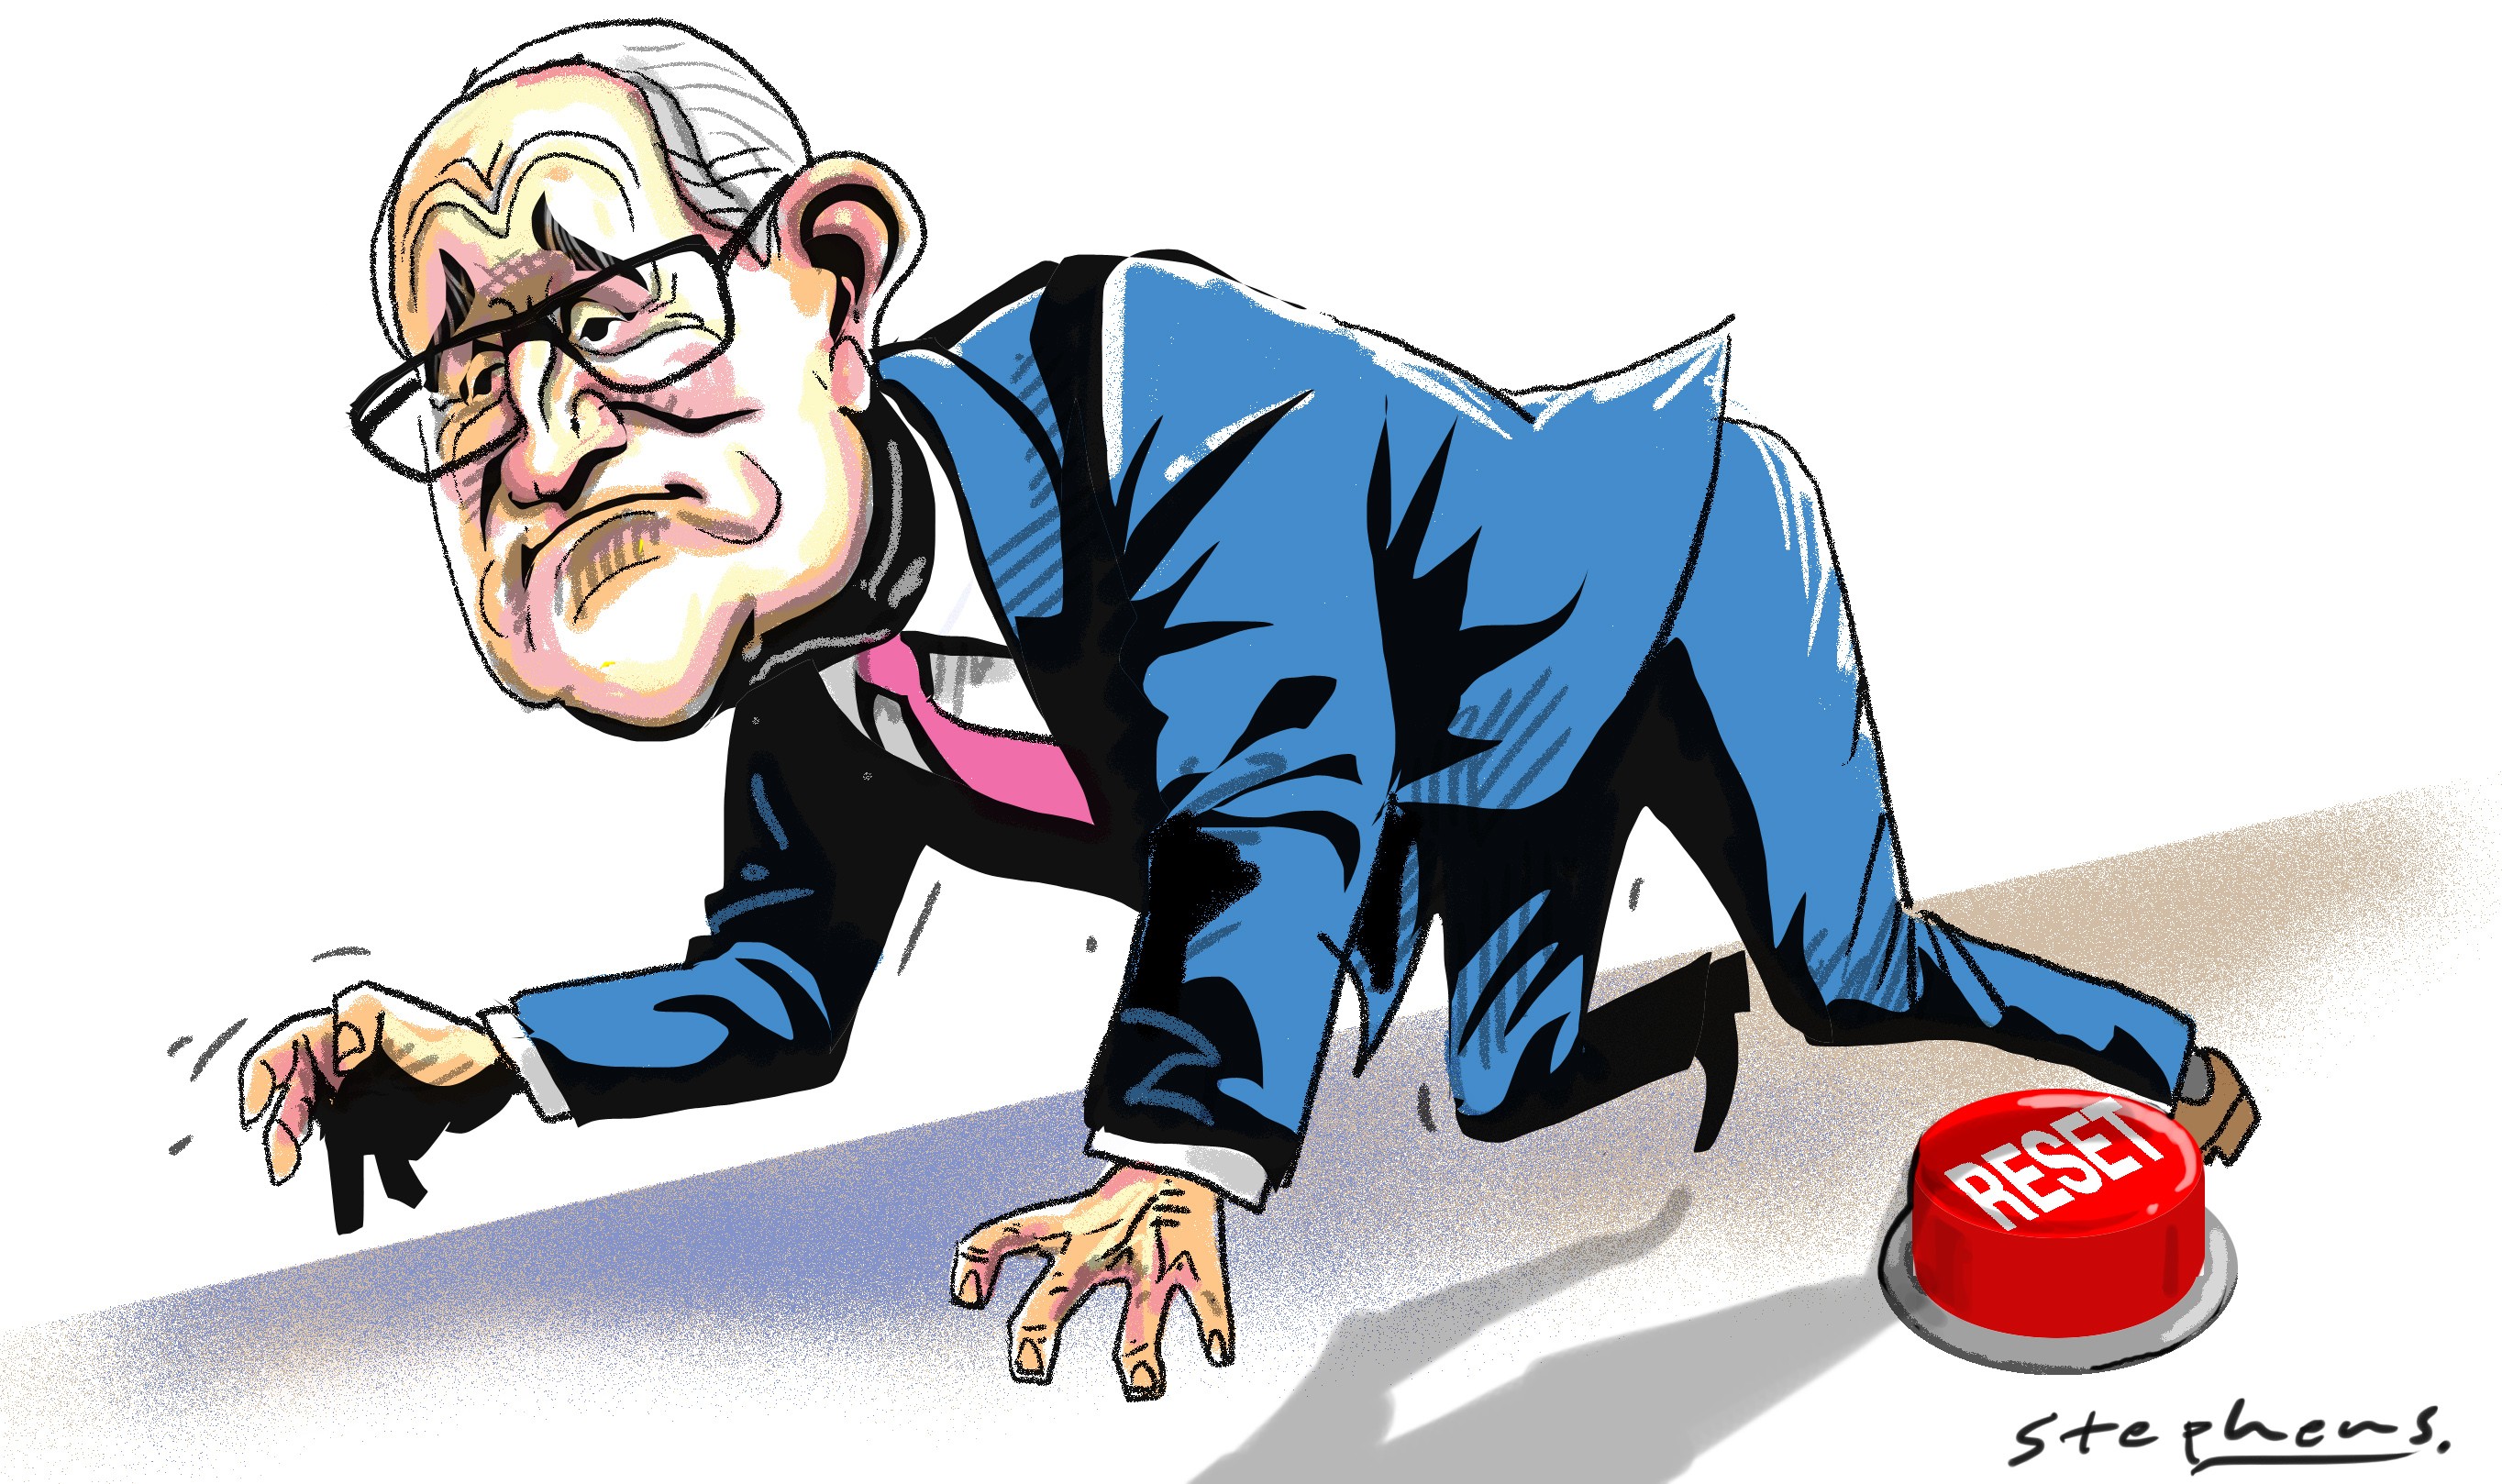 Australian Prime Minister Malcolm Turnbull has only been prepared to concede there is “a degree of tension” in the relationship with China. Illustration: Craig Stephens